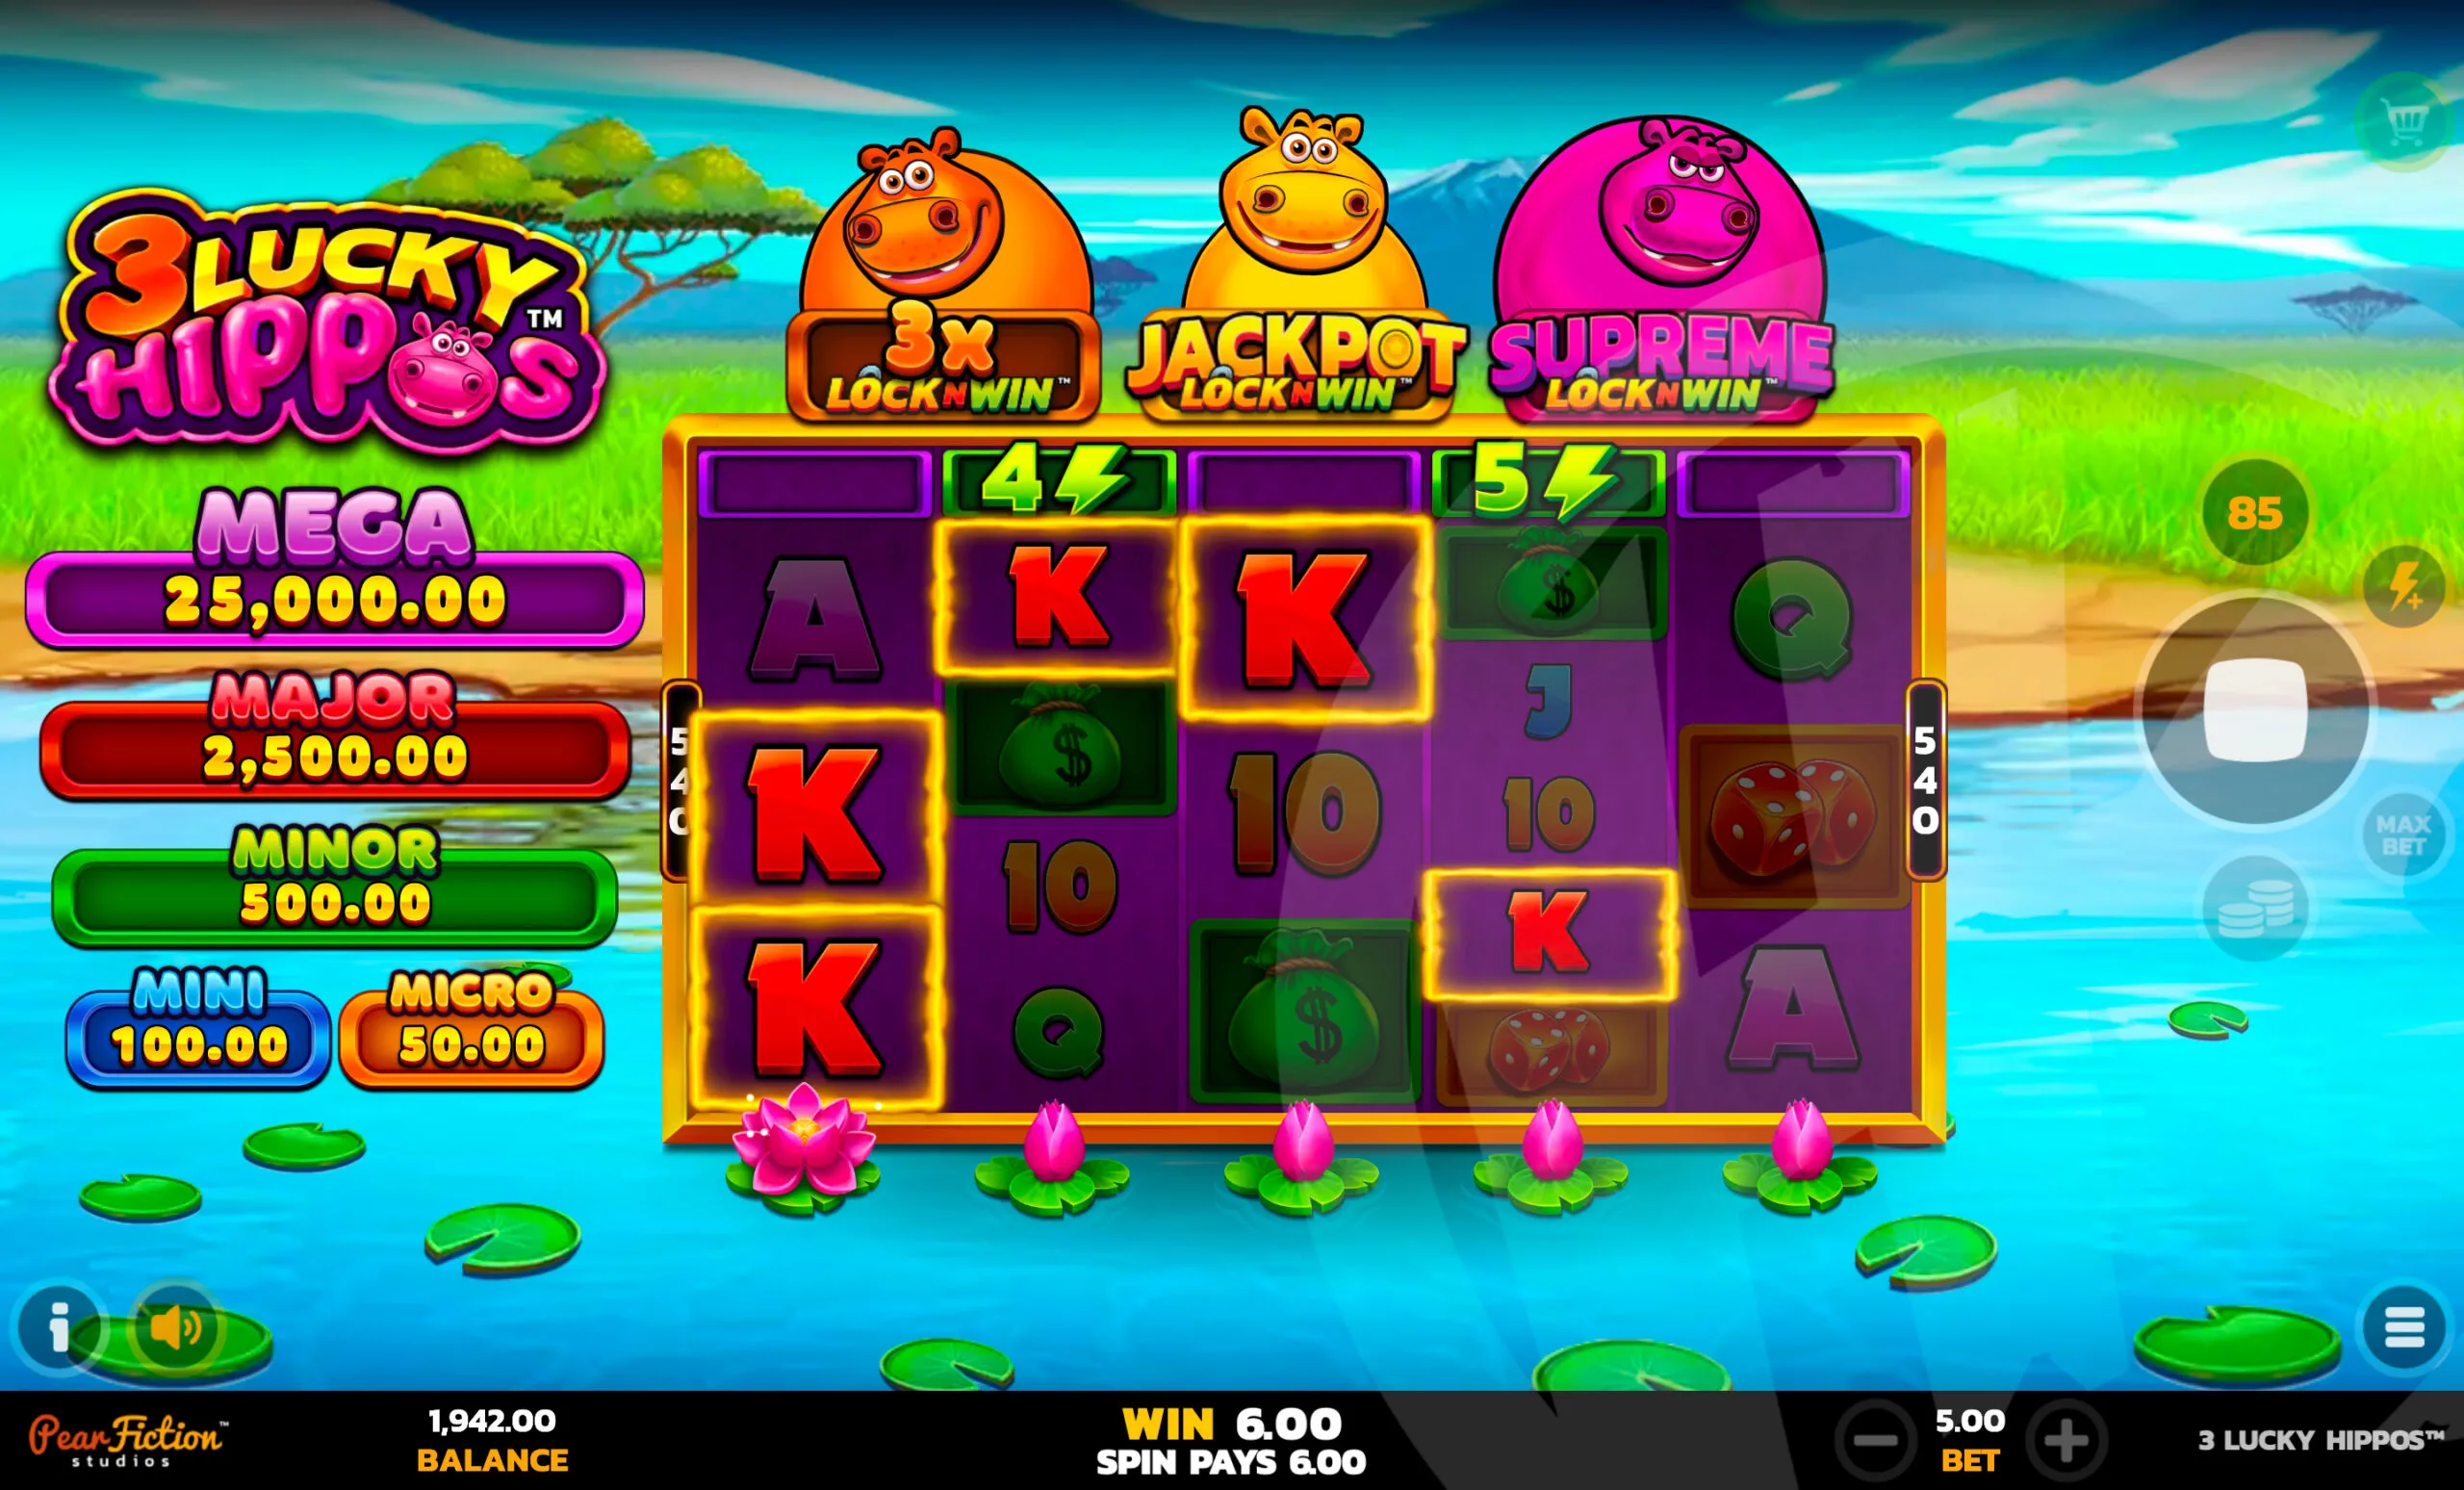 3 Lucky Hippos Offers Players Between 243 and 7,776 Ways to Win